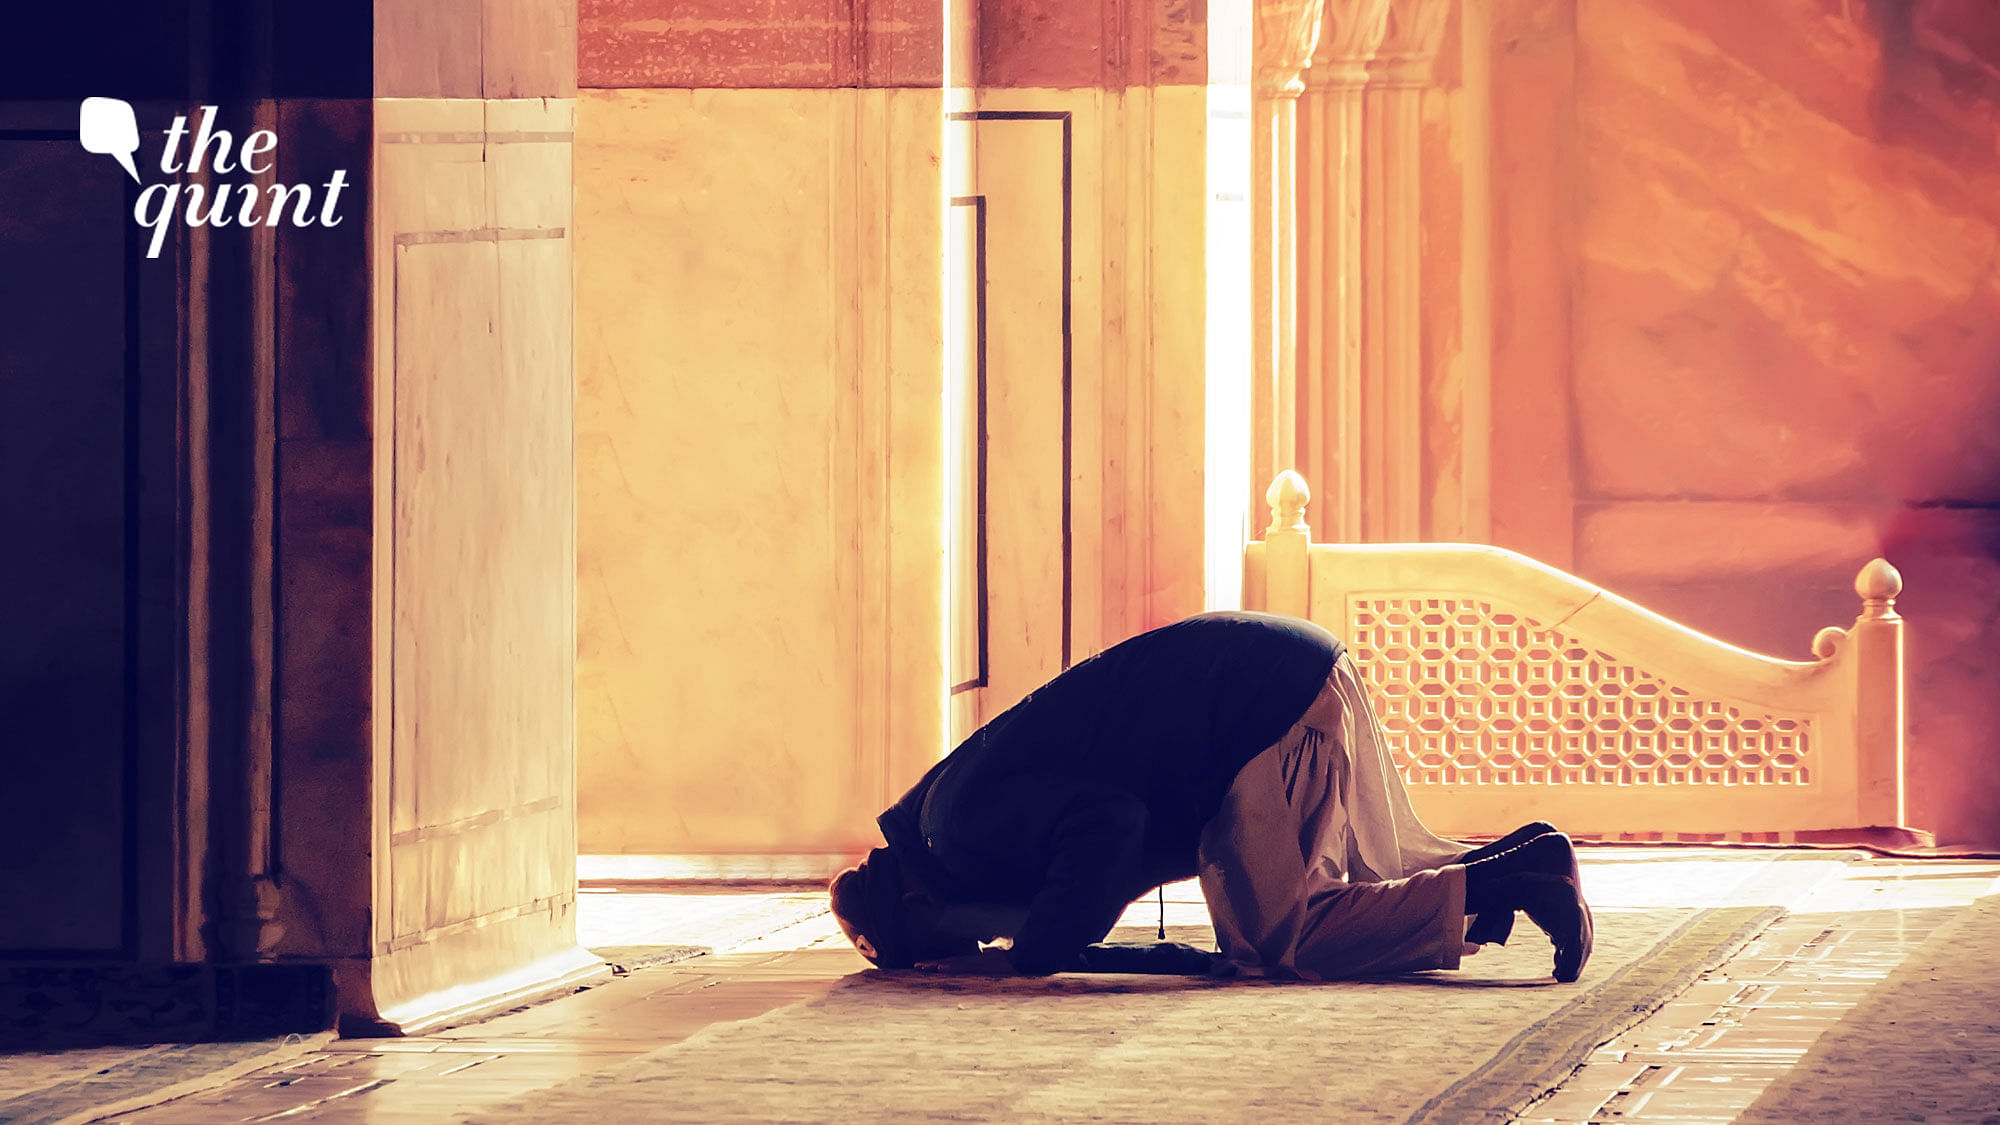 Image of a man praying at a mosque, used for representation.